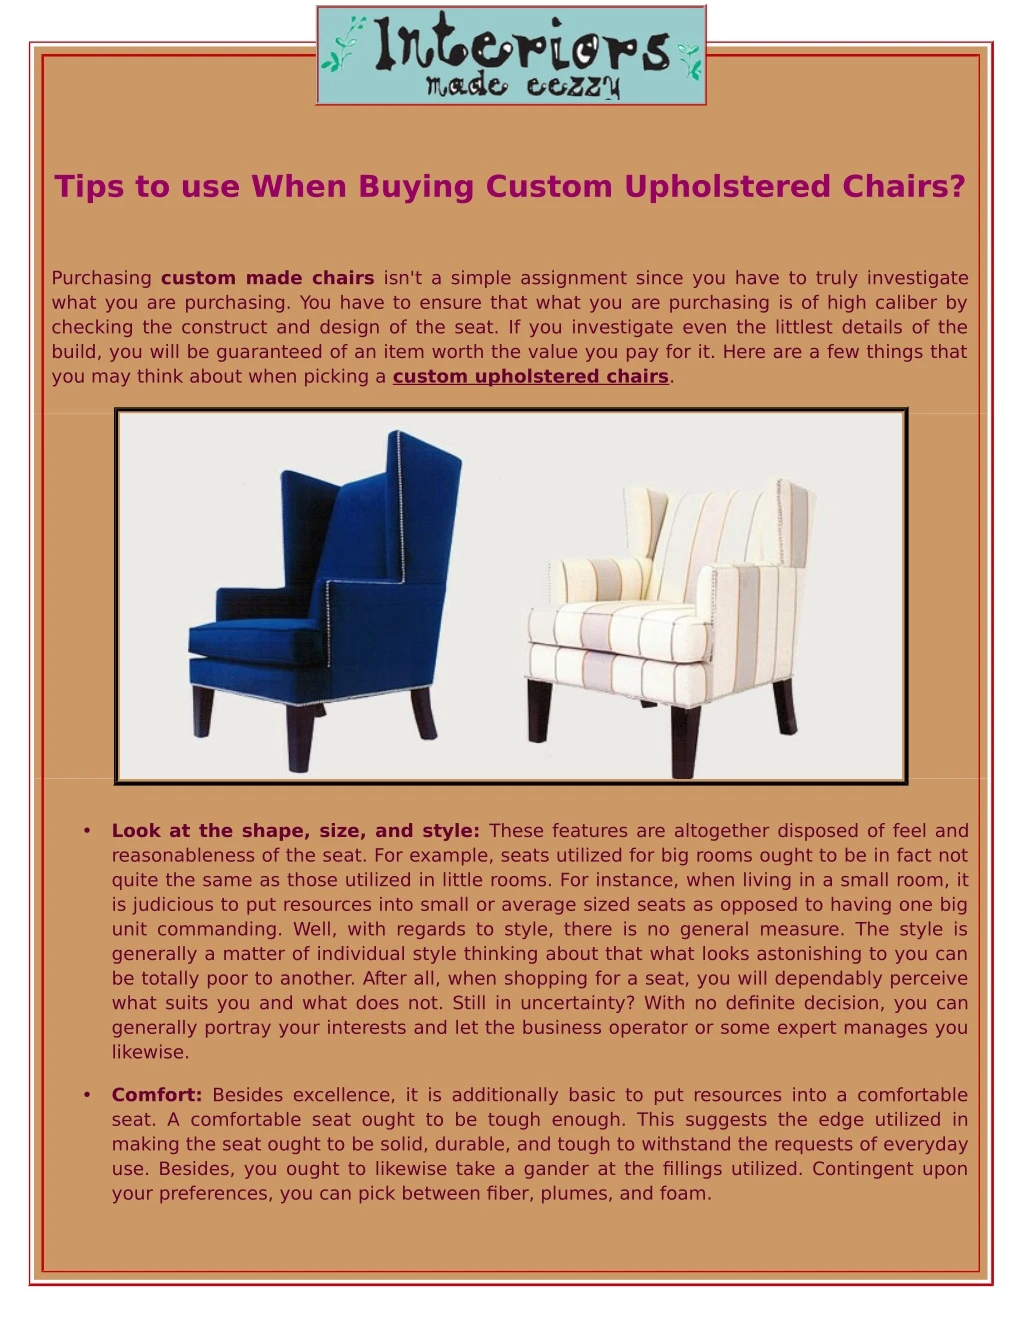 tips to use when buying custom upholstered chairs